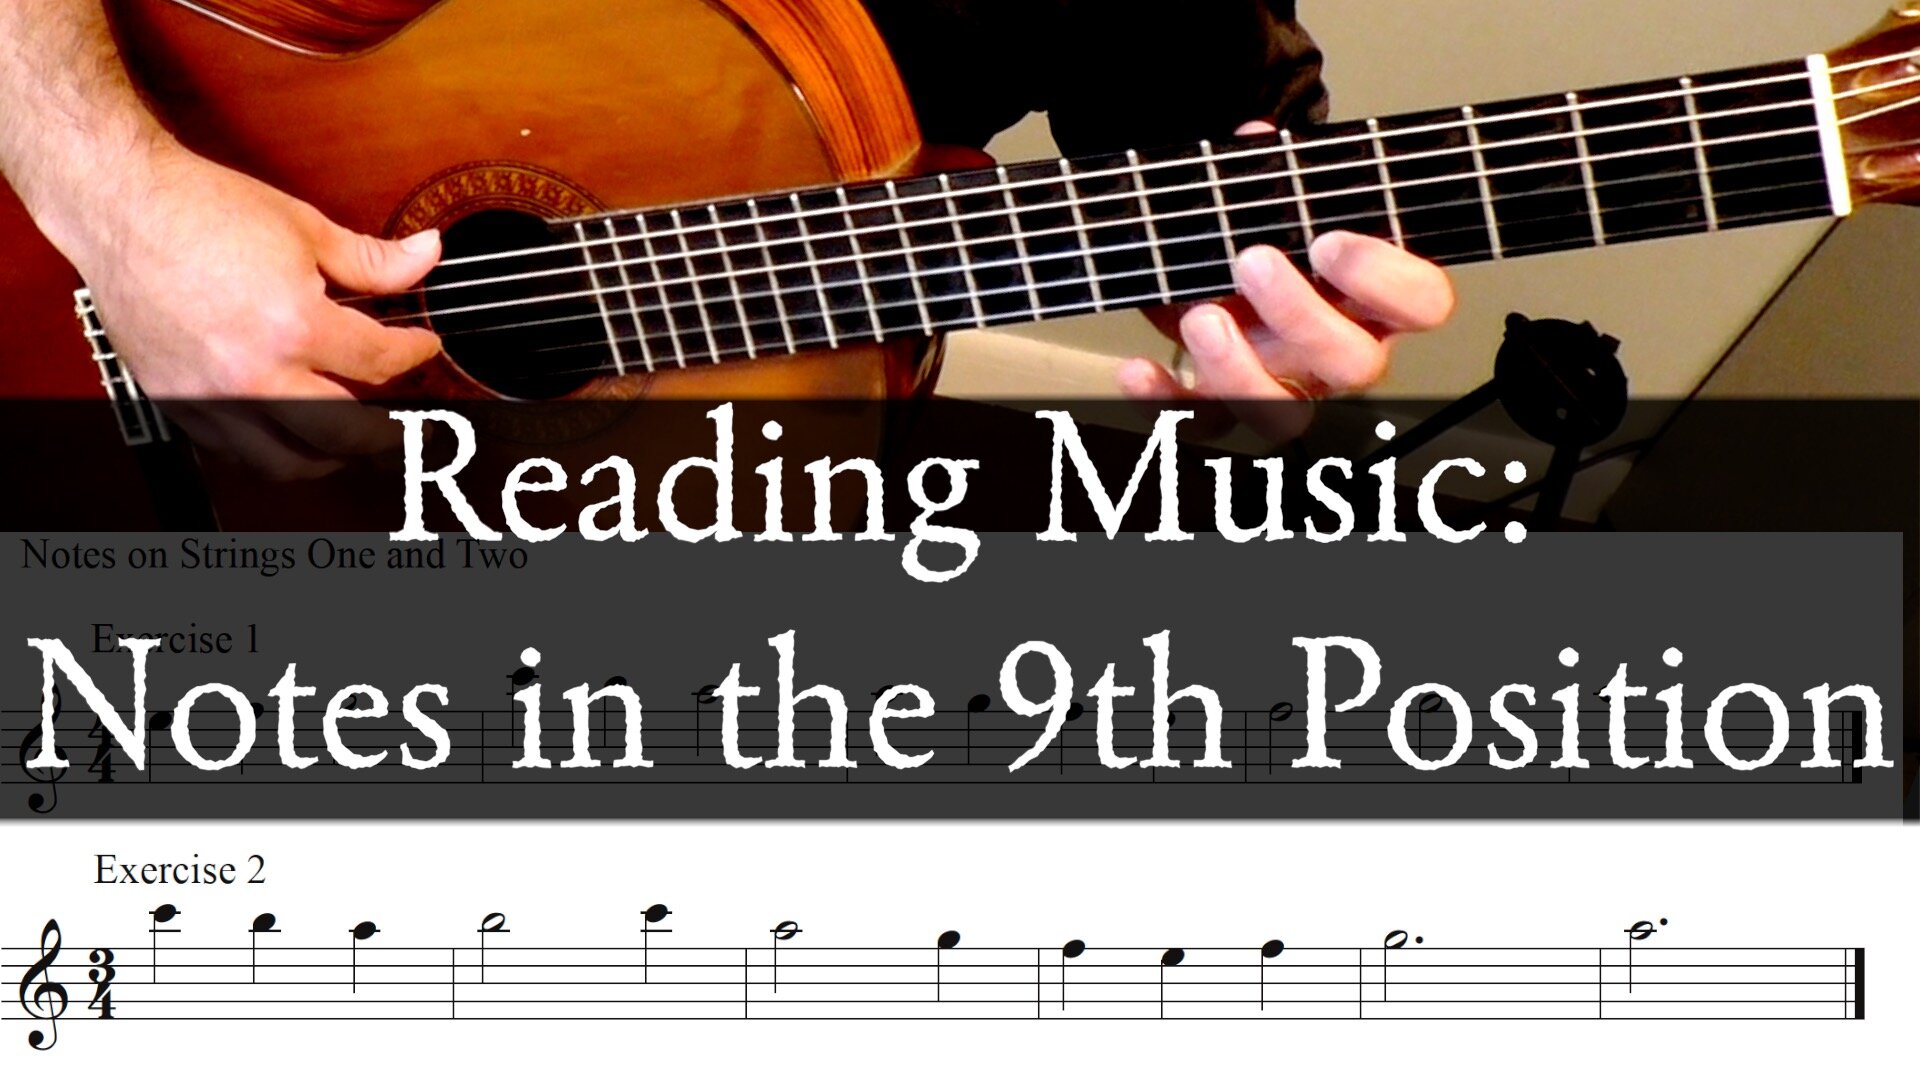 Reading Music: 9th Position